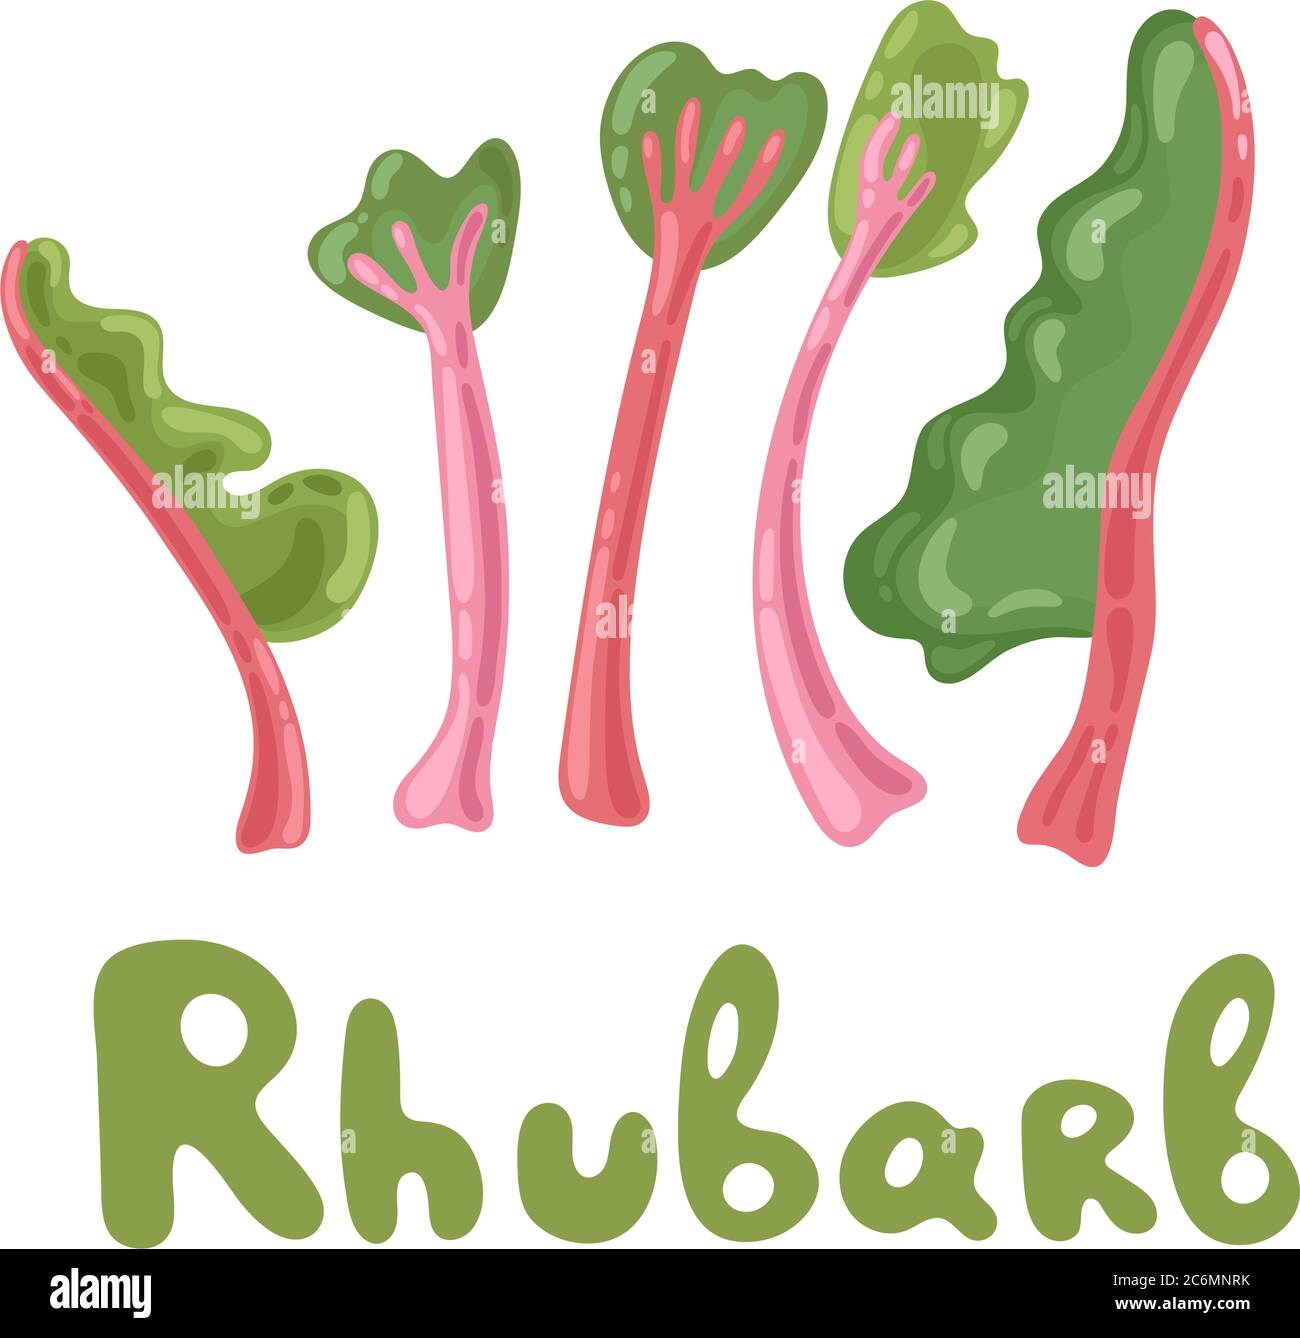 Rhubarb stock clipart. Vegetable colorful icon. Whole rhubarb vector illustration, cartoon flat icon isolated on white. Rhubarb leaves, edible plant Stock Vector